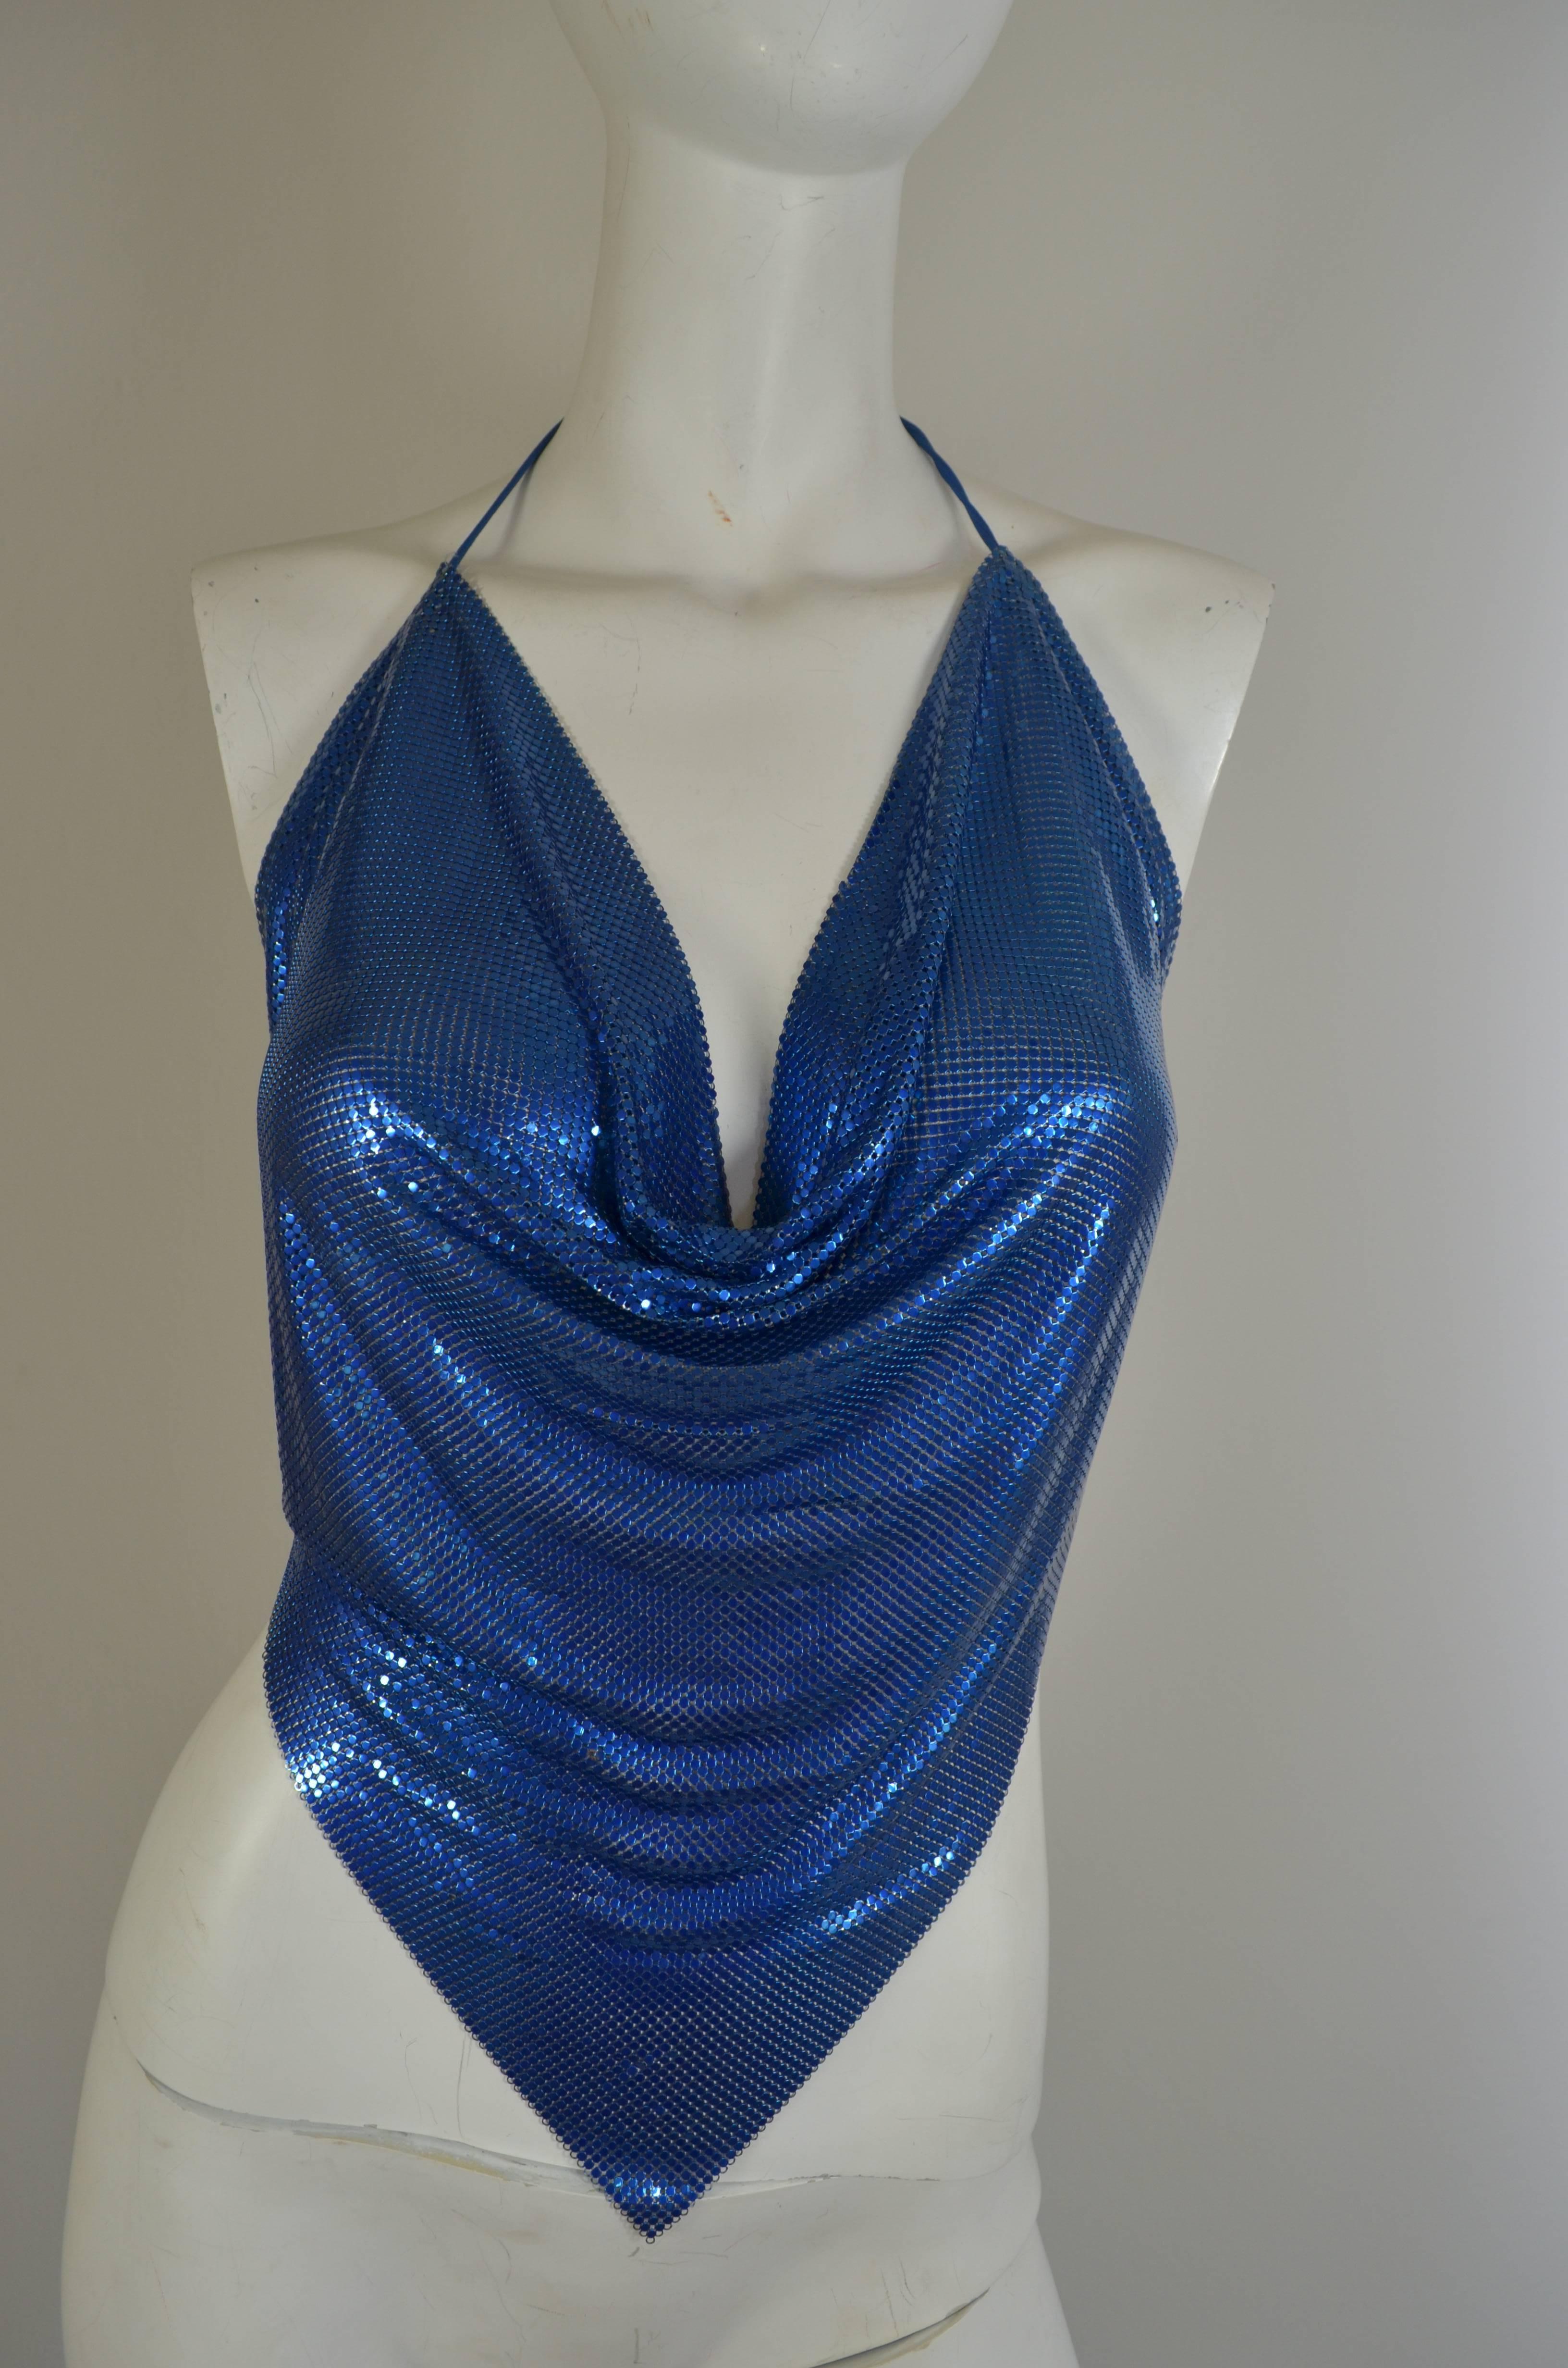 Whiting Davis 1970's or early 1980's iridescent blue plated brass halter top. Wearable body jewelry. Ties at neck and back. Felt at sides, label missing. Vintage top had good weight to it which adds to the beat of how the top falls on the body when